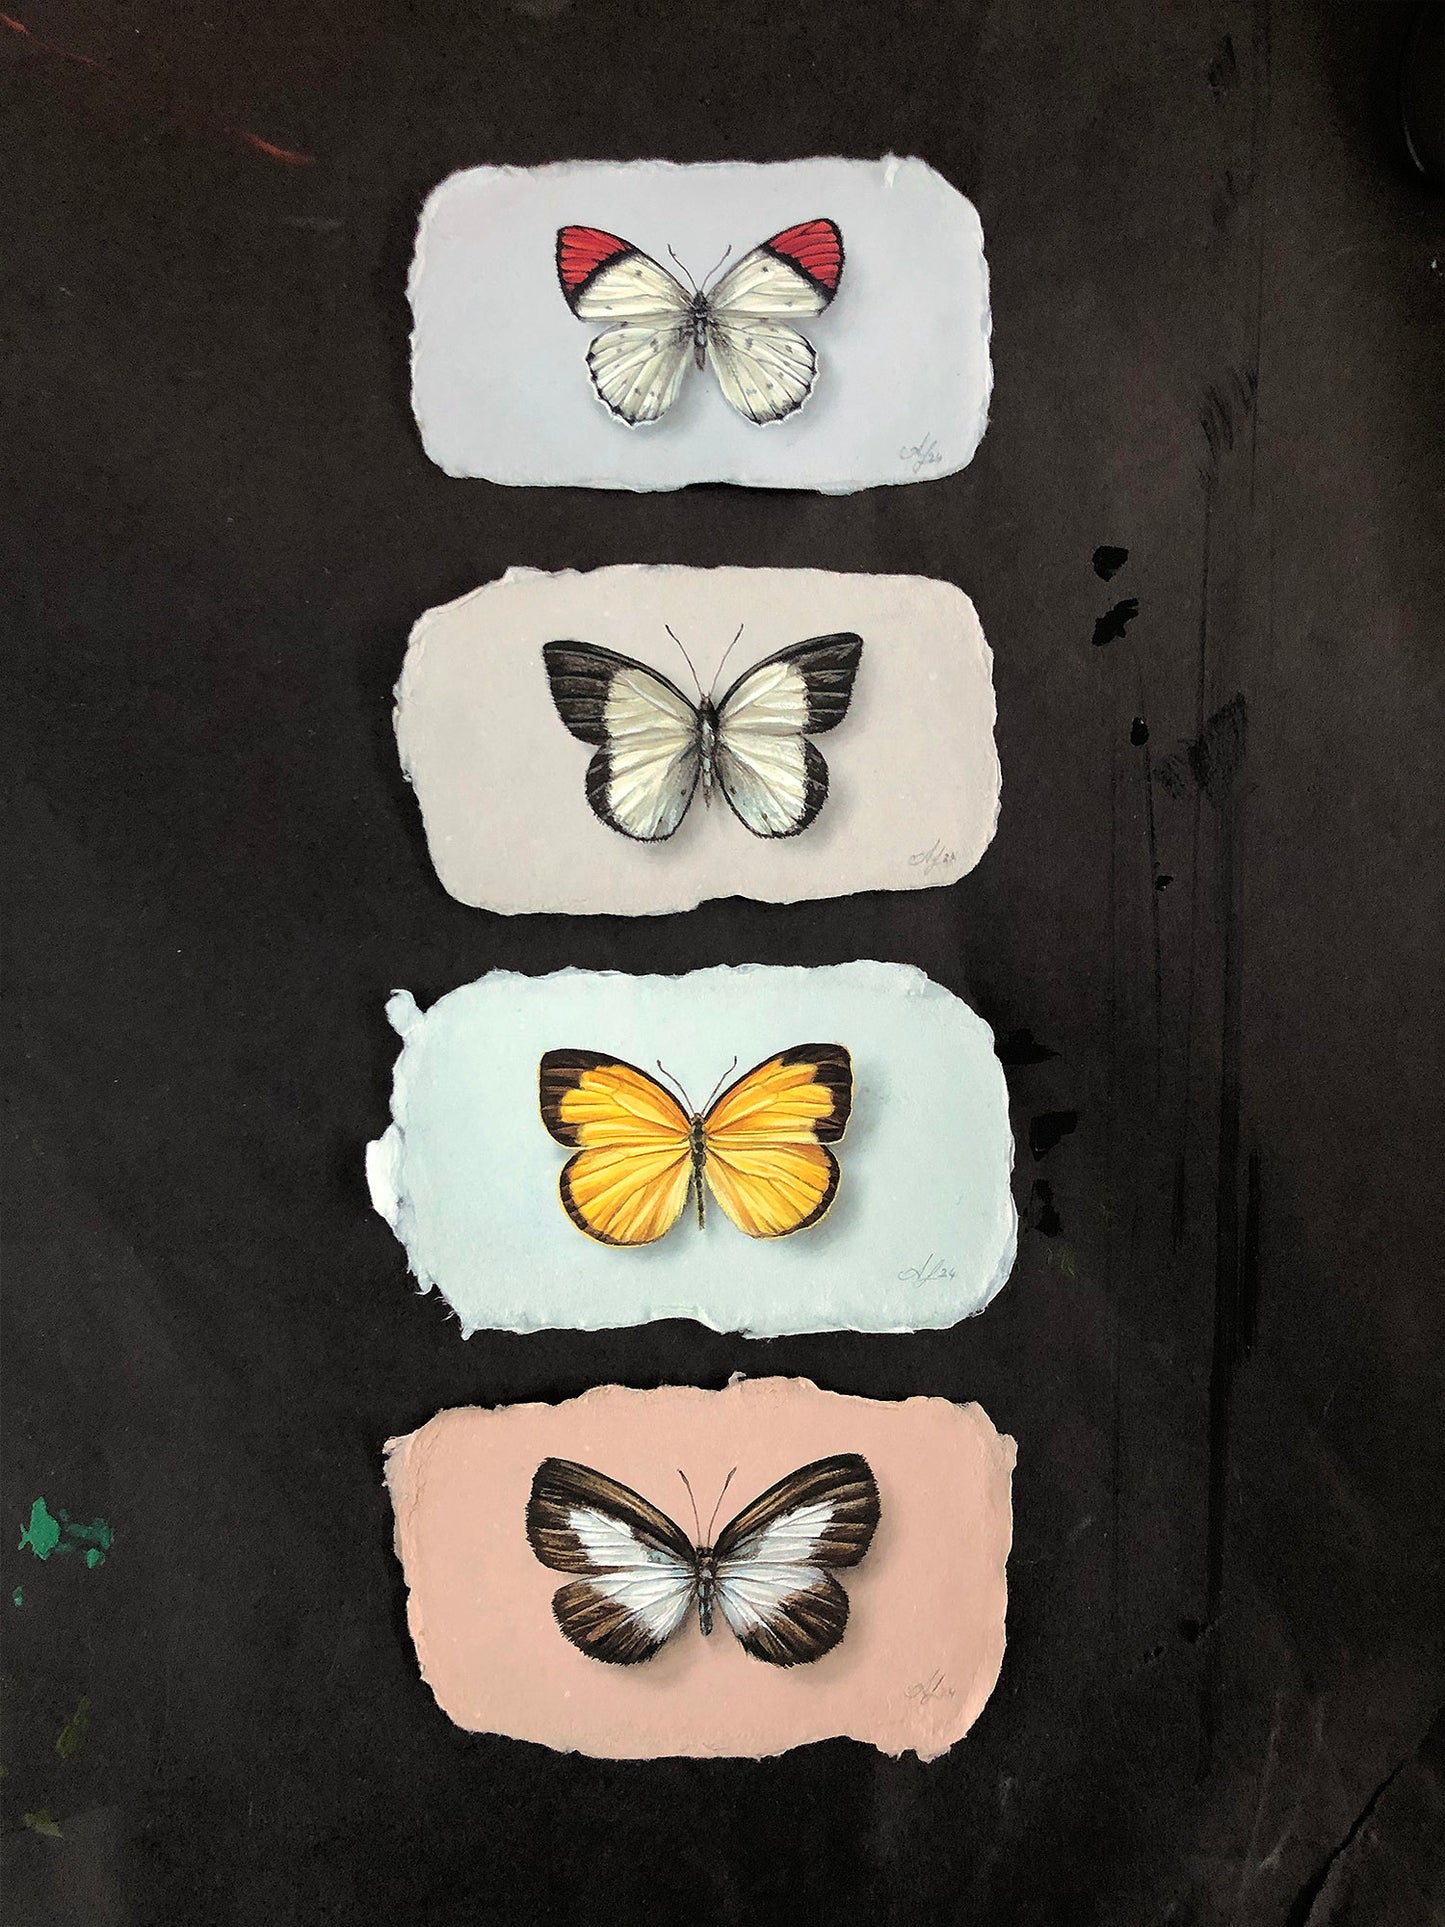 Butterfly on Handmade Paper #1 - 4.5 x 2.5"